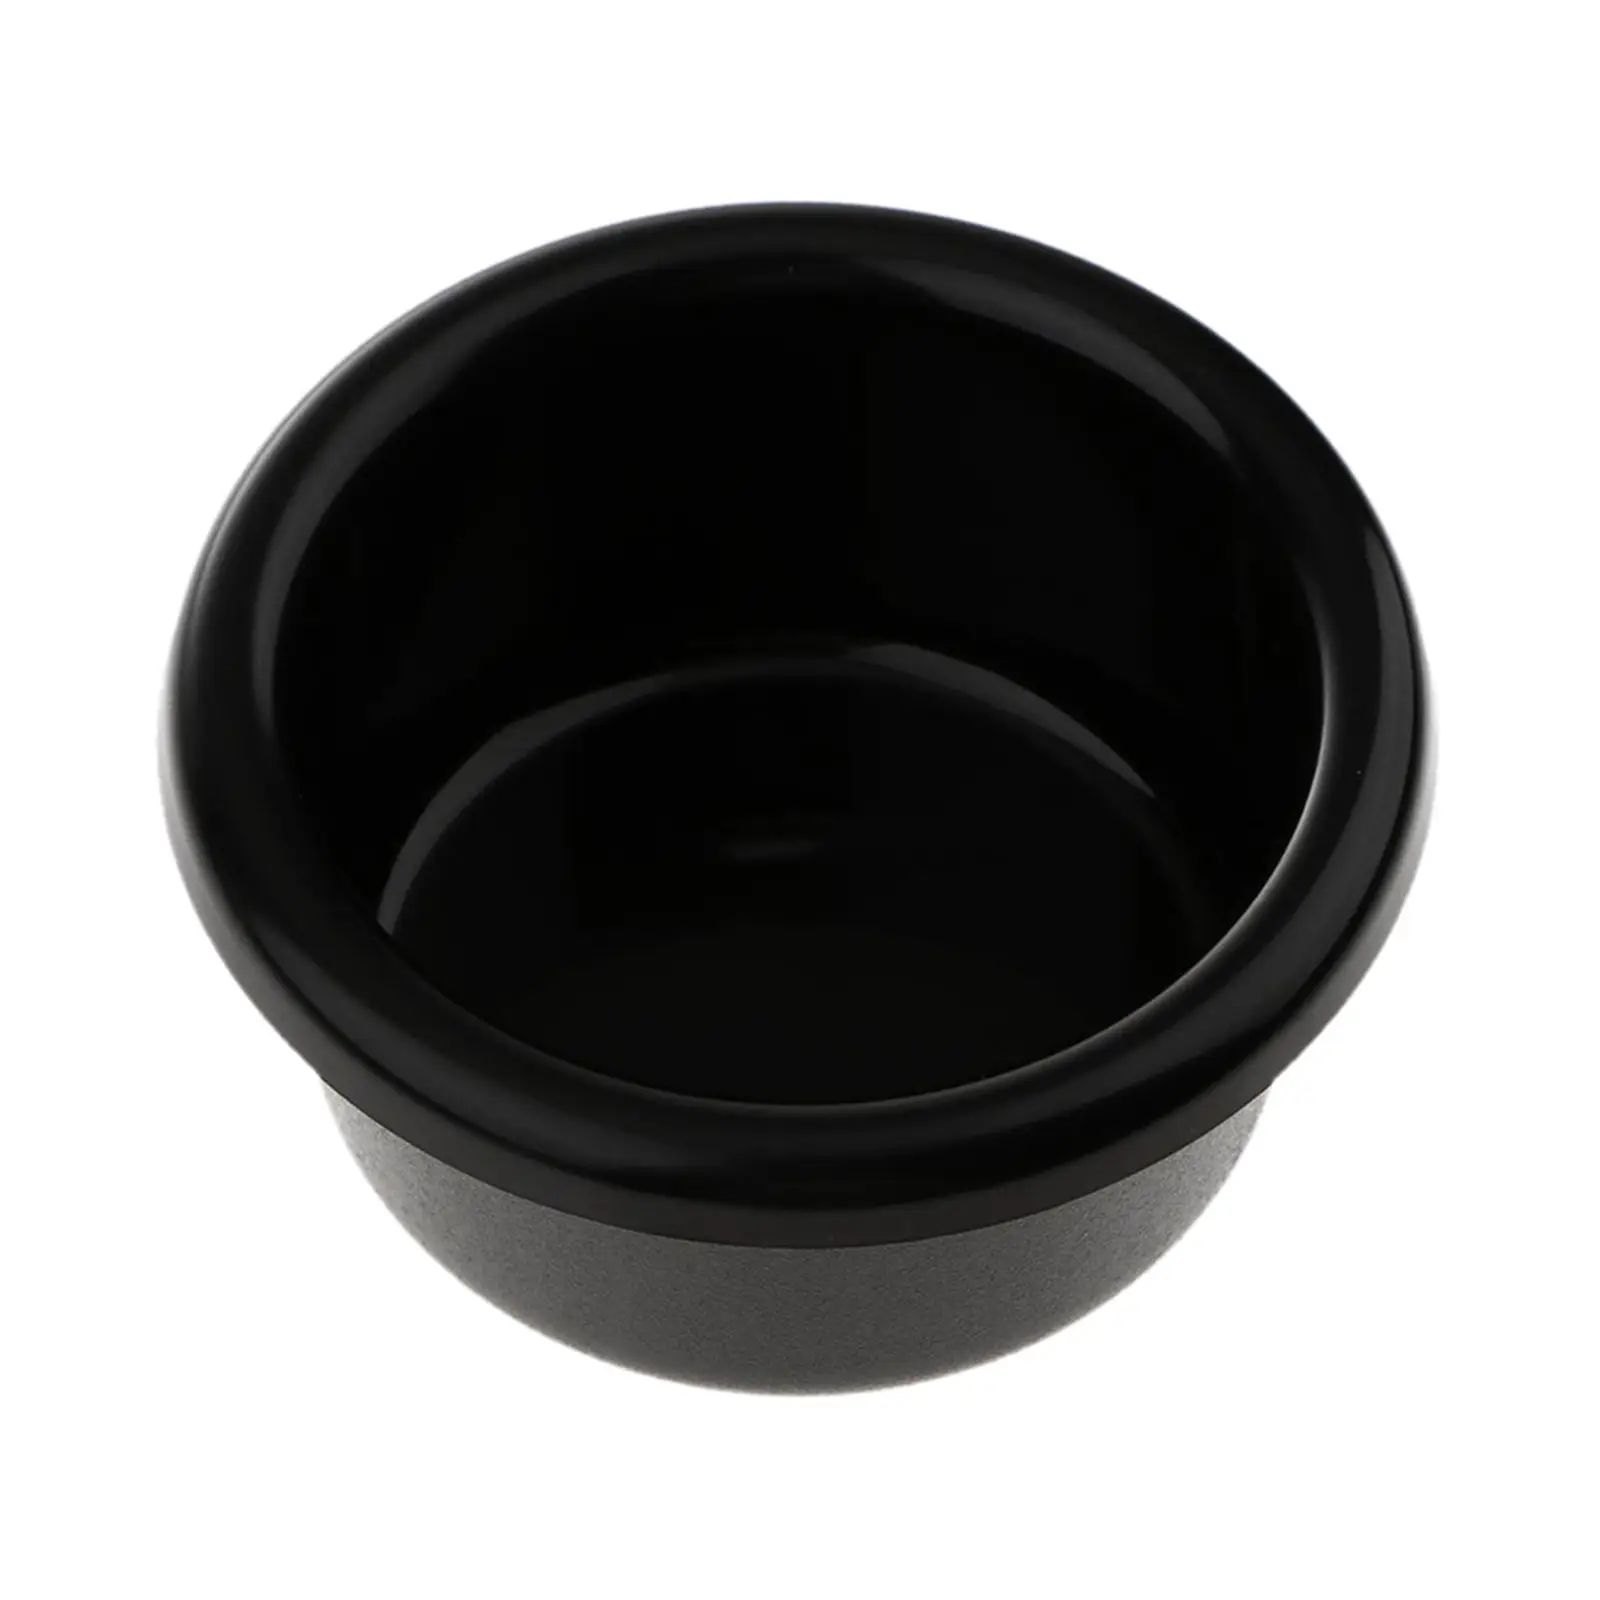 Universal Black Plastic Cup Drink Can Holder 100mm Dia for Boat Marine RV